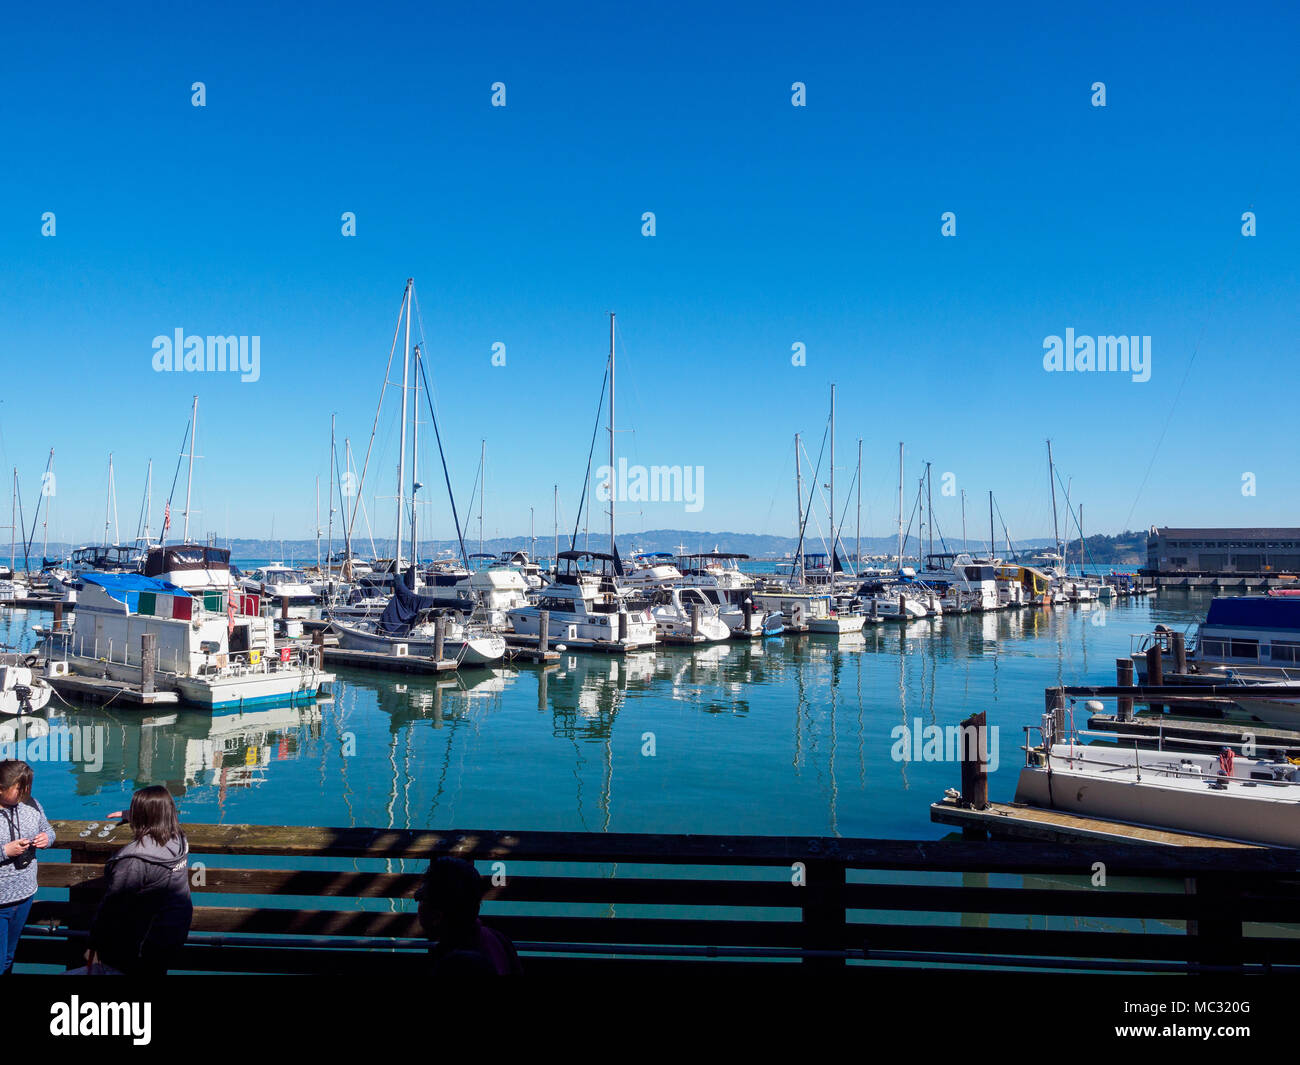 San Francisco, California - Feb 17, 2018 : Scenery of Pier 39 fisherman's wharf at San Francisco, which is a famous tourist spot. Stock Photo